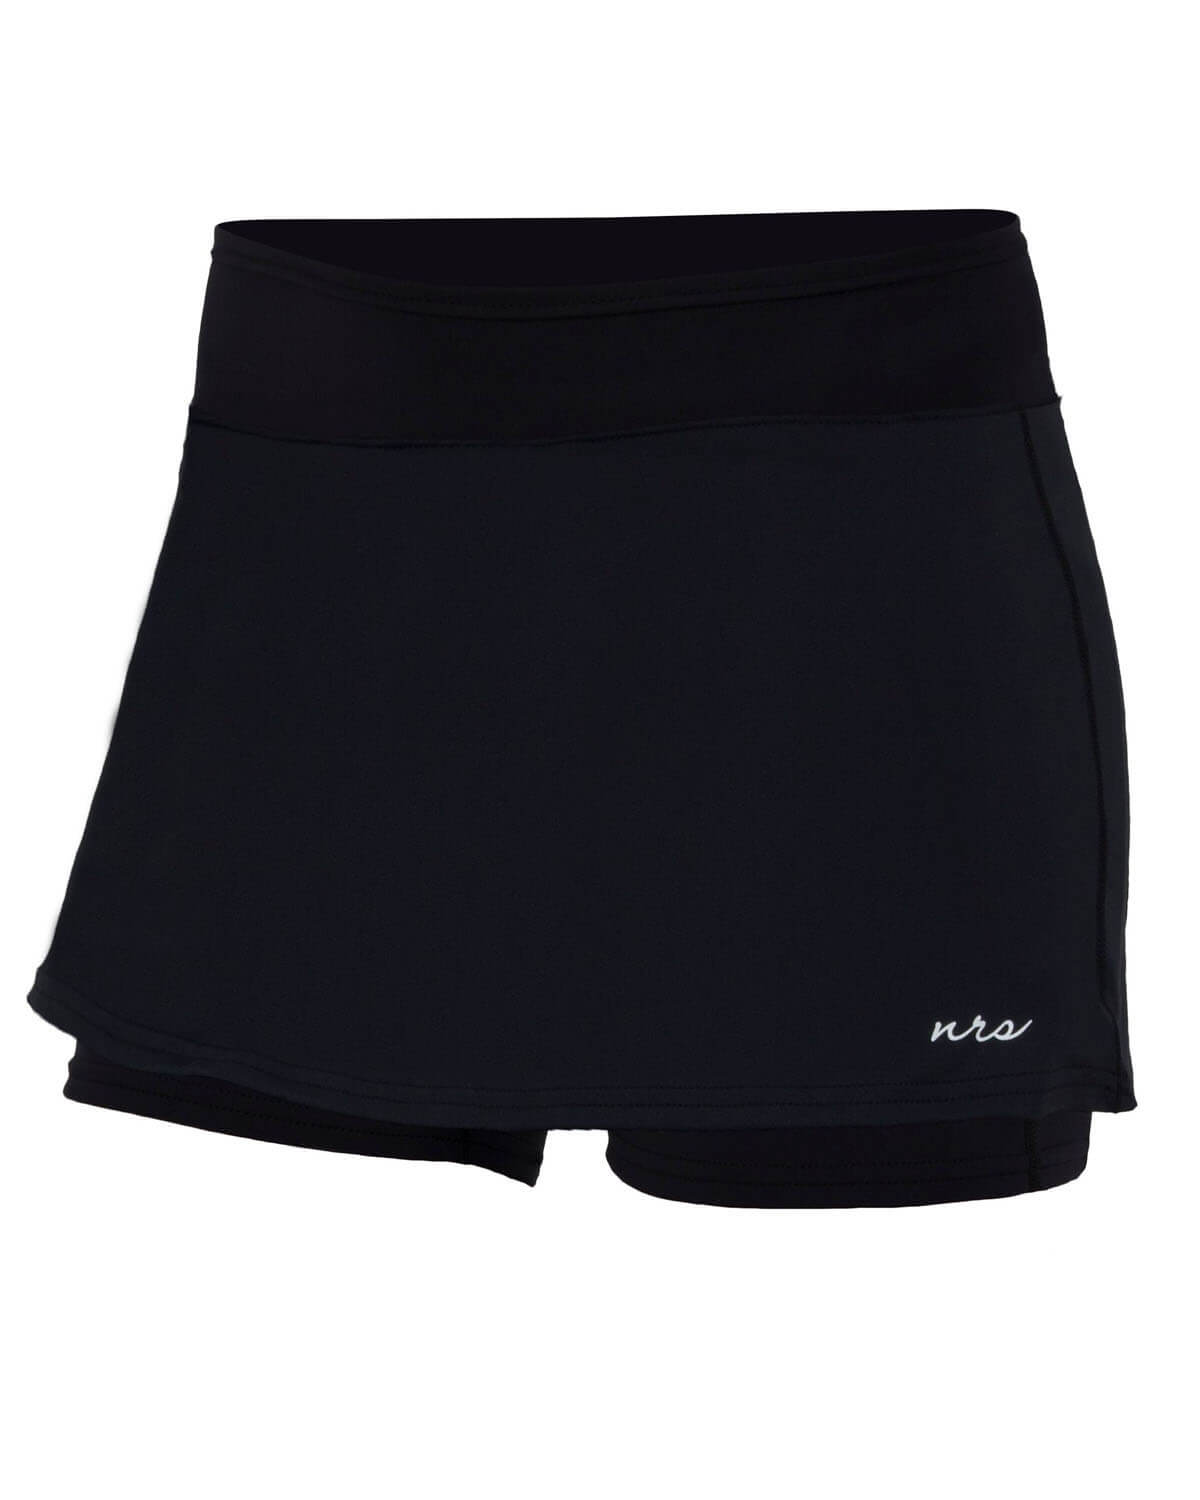 0.5mm Women's NRS HYDROSKIN Shorts with Skirt